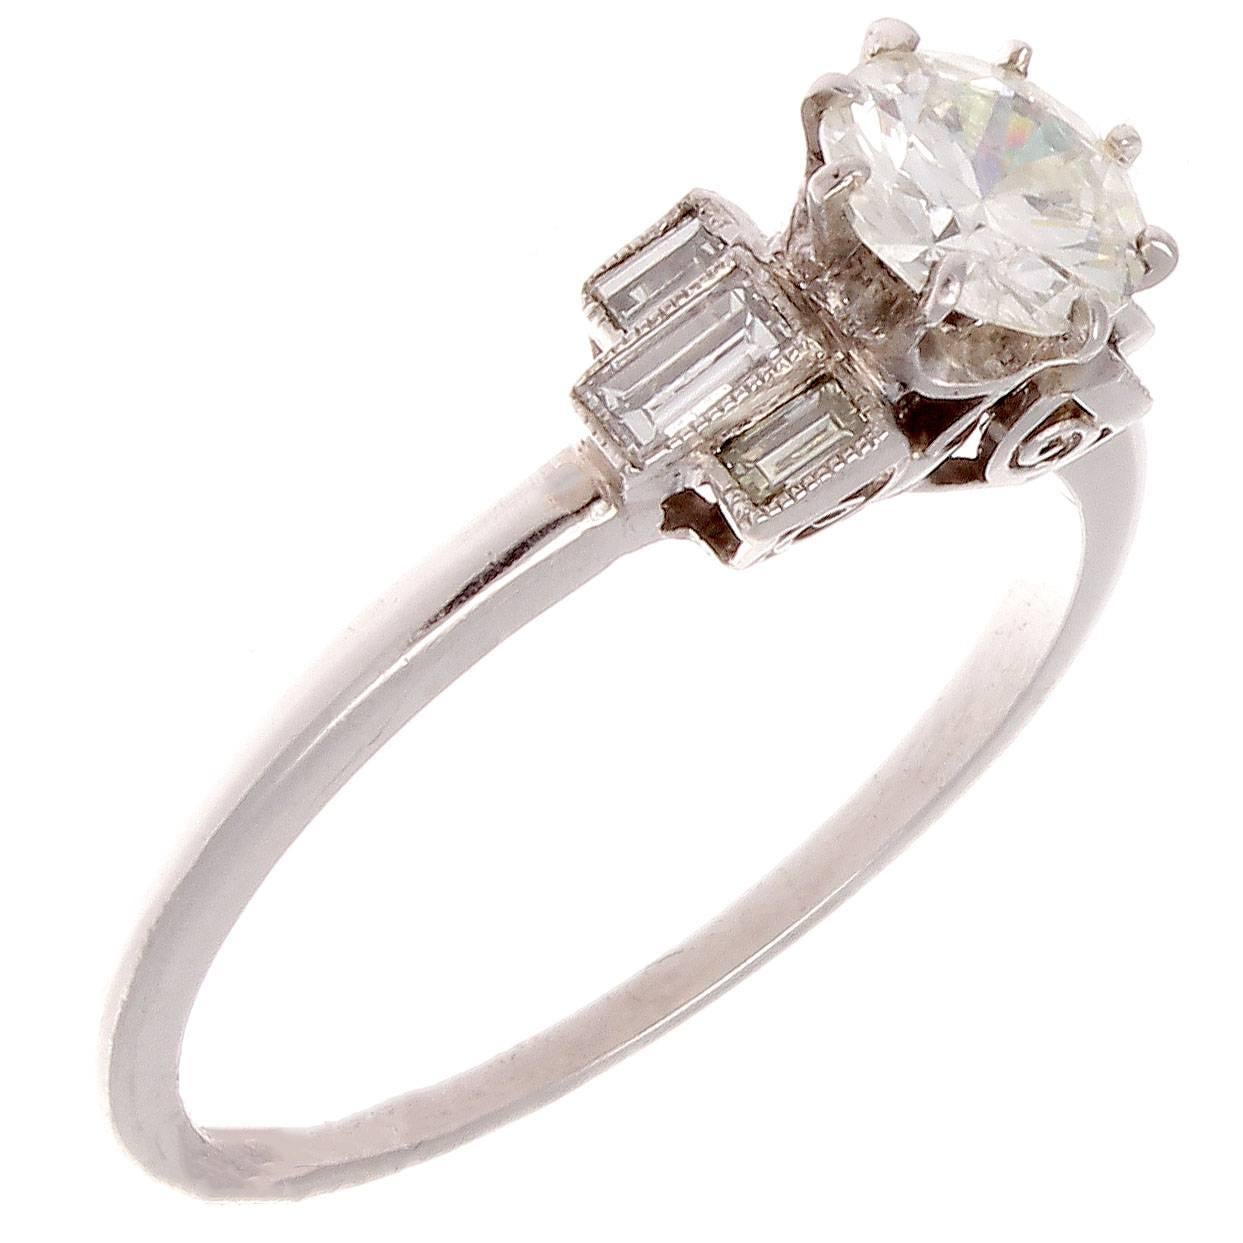 The allure of the Art Deco time period has inspired the creation of this lovely engagement ring. Featuring a center diamond weighing 0.58 carats and is H color, SI1 clarity. Accented by a spray of baguette cut diamonds on either side. Crafted in